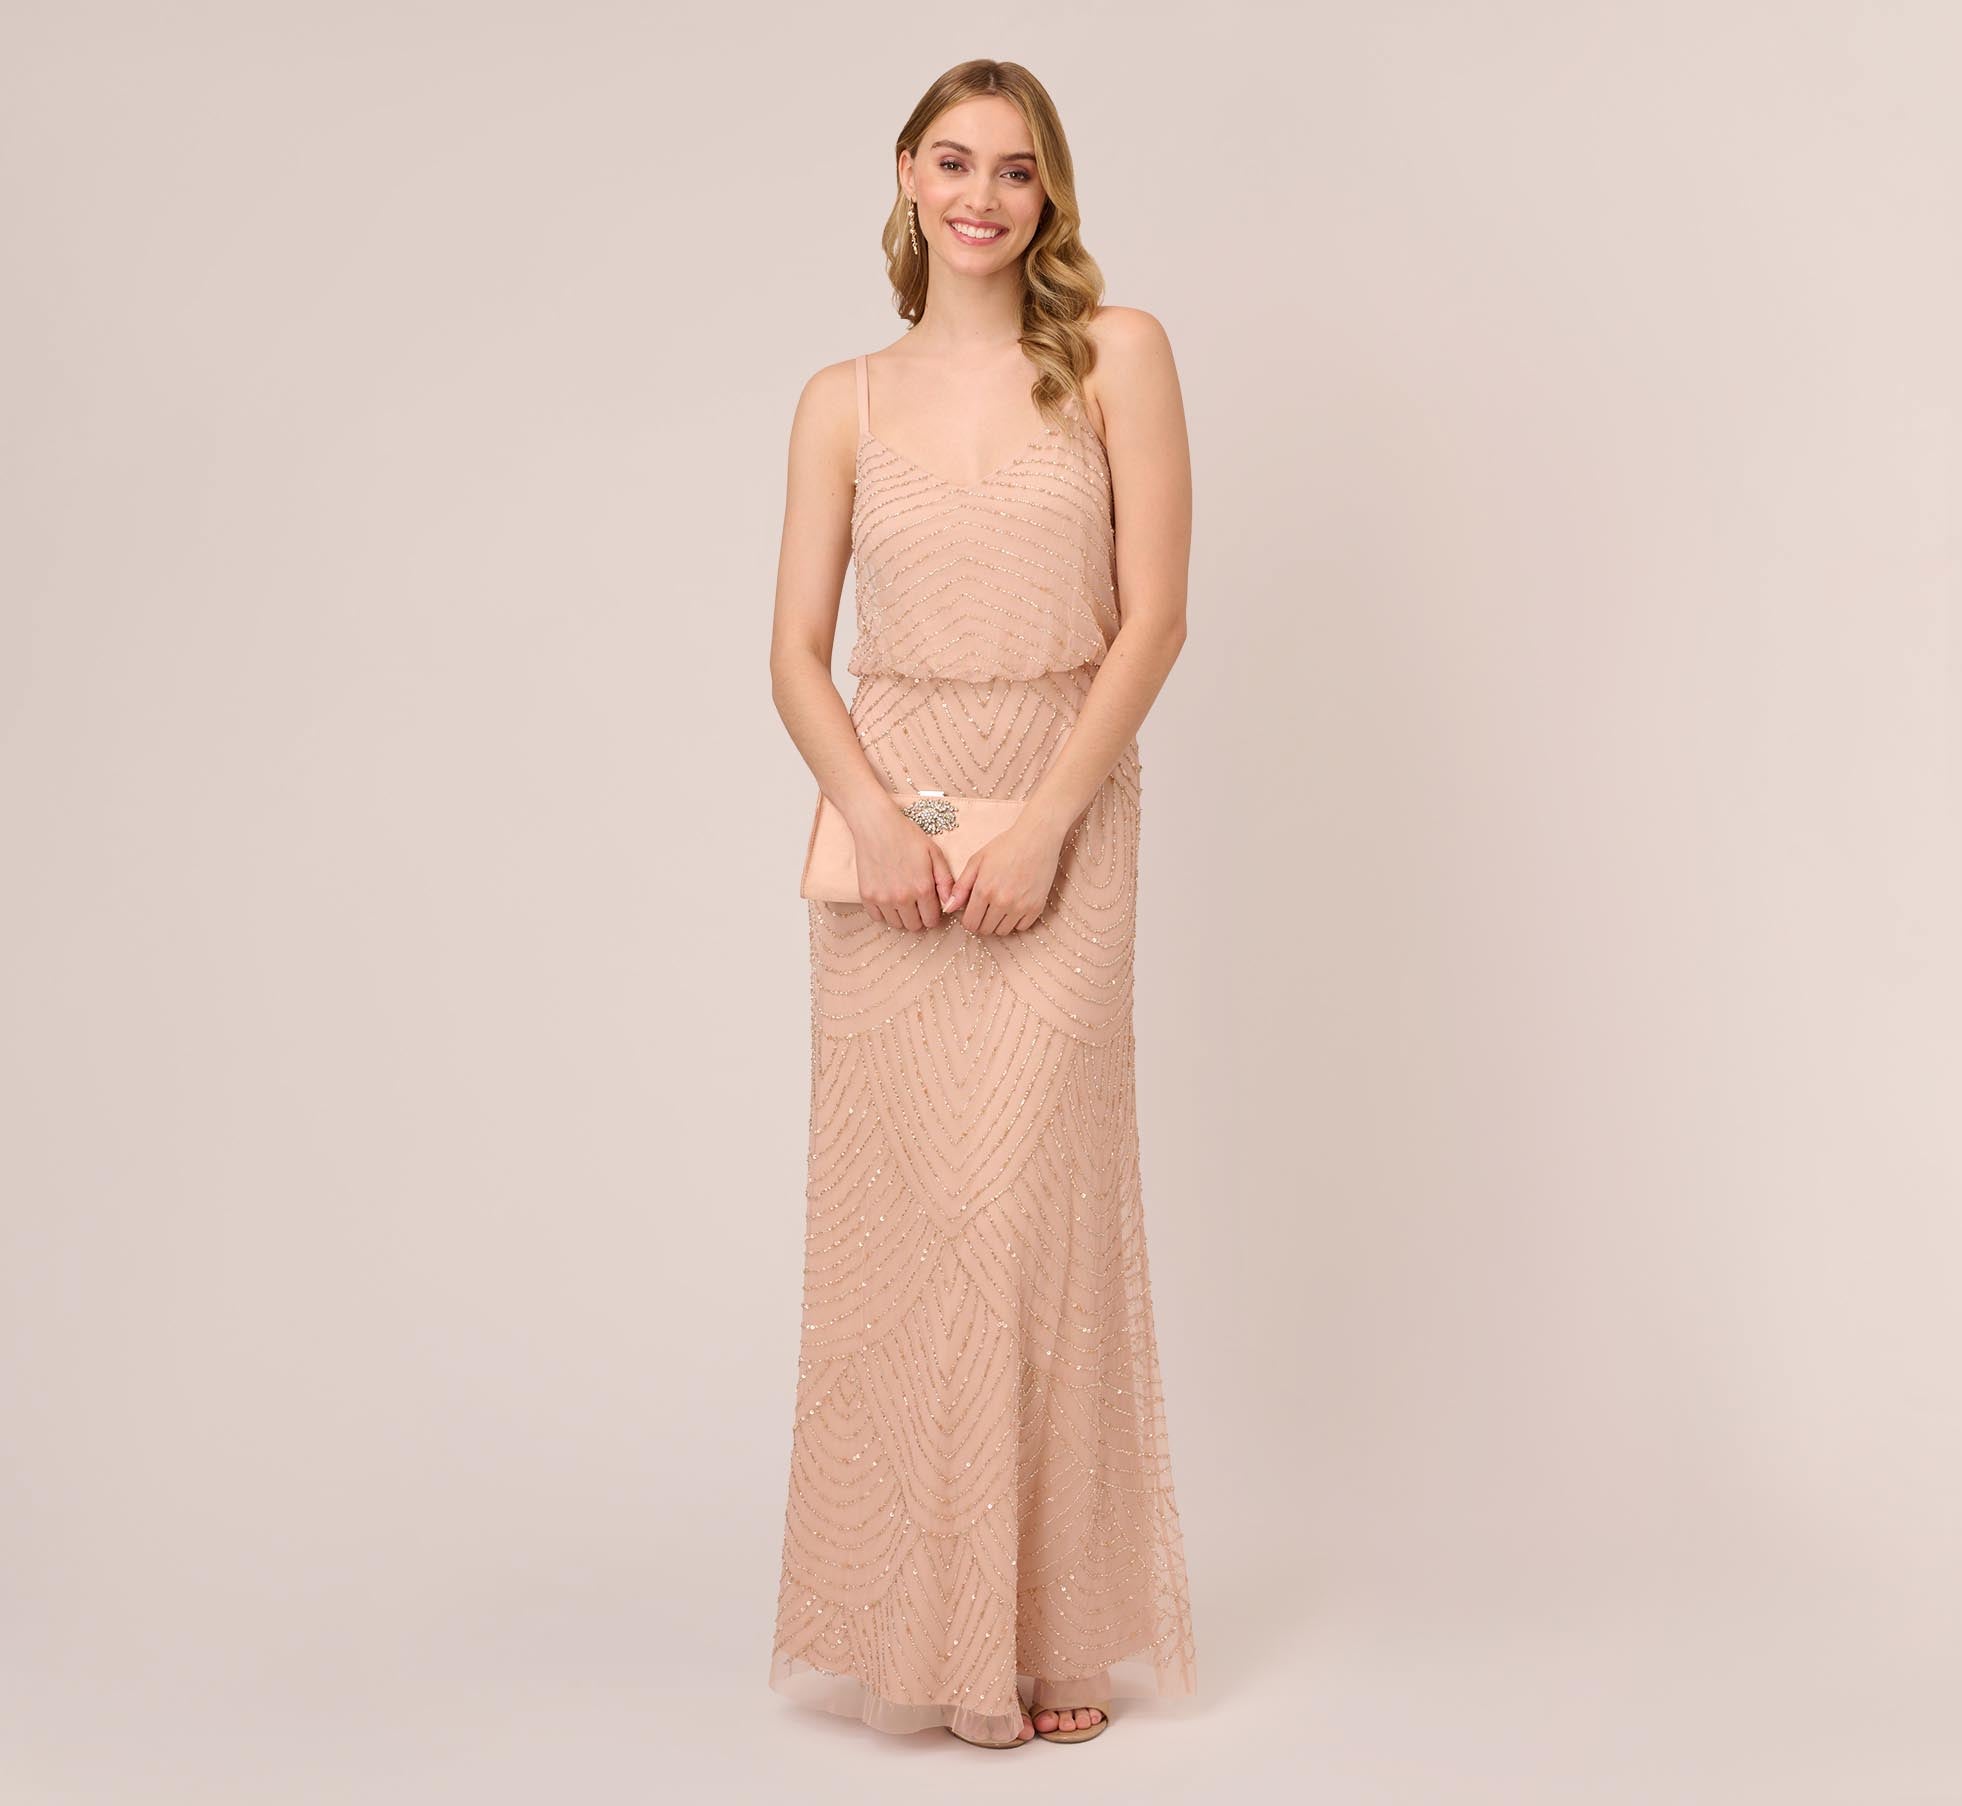 Adrianna Papell Art Deco Beaded Blouson Gown - Taupe Pink - Adinas